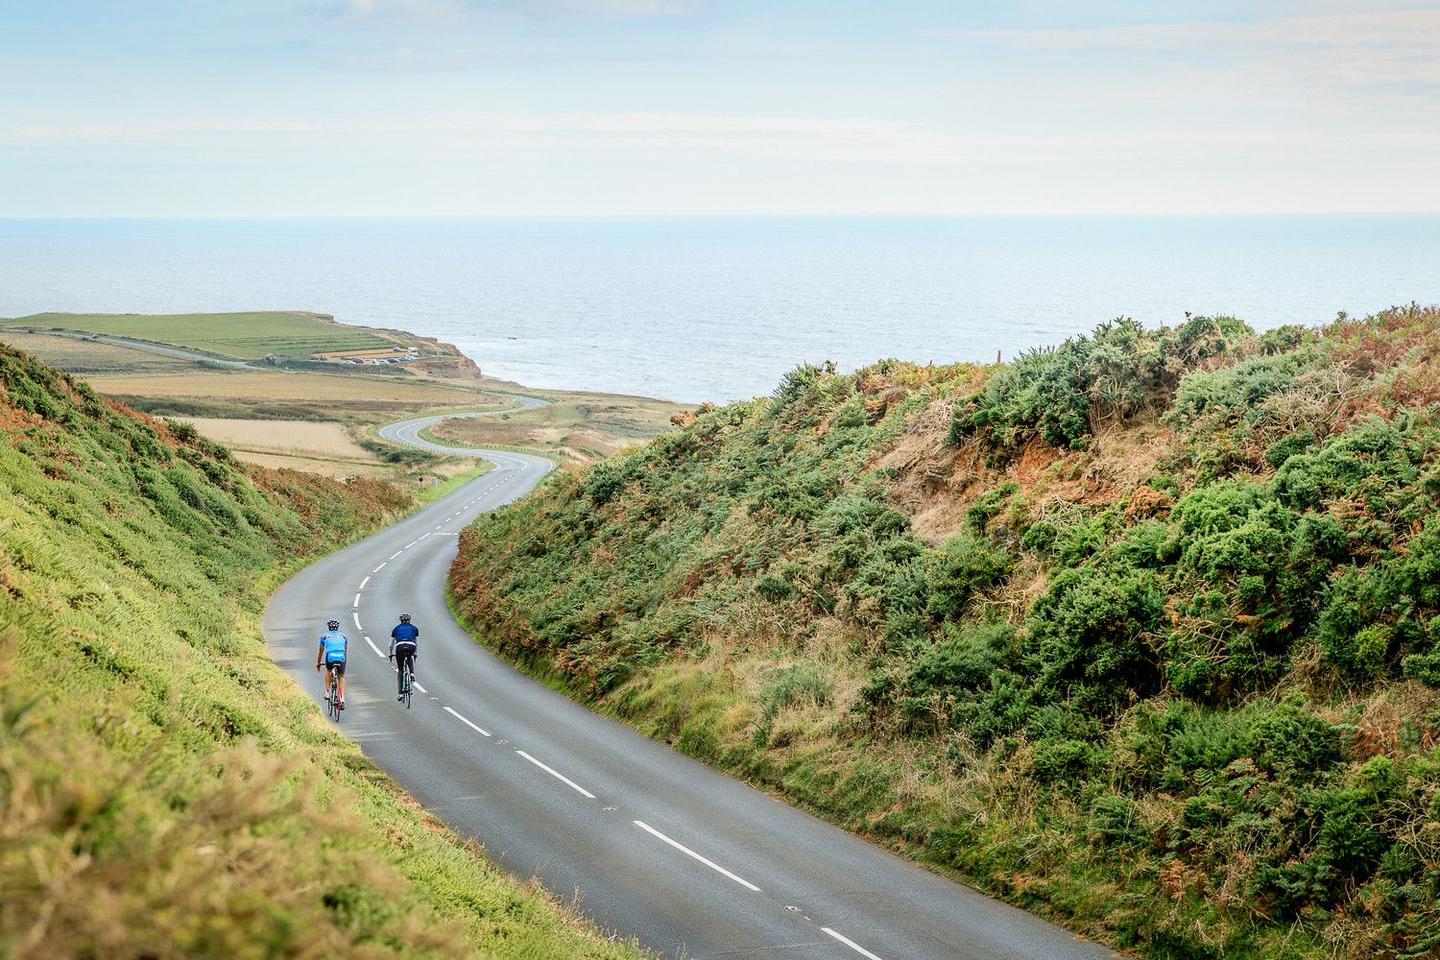 Two cyclists riding on a winding coastal road in the Isle of Man, surrounded by lush green hills with a view of the ocean in the background.